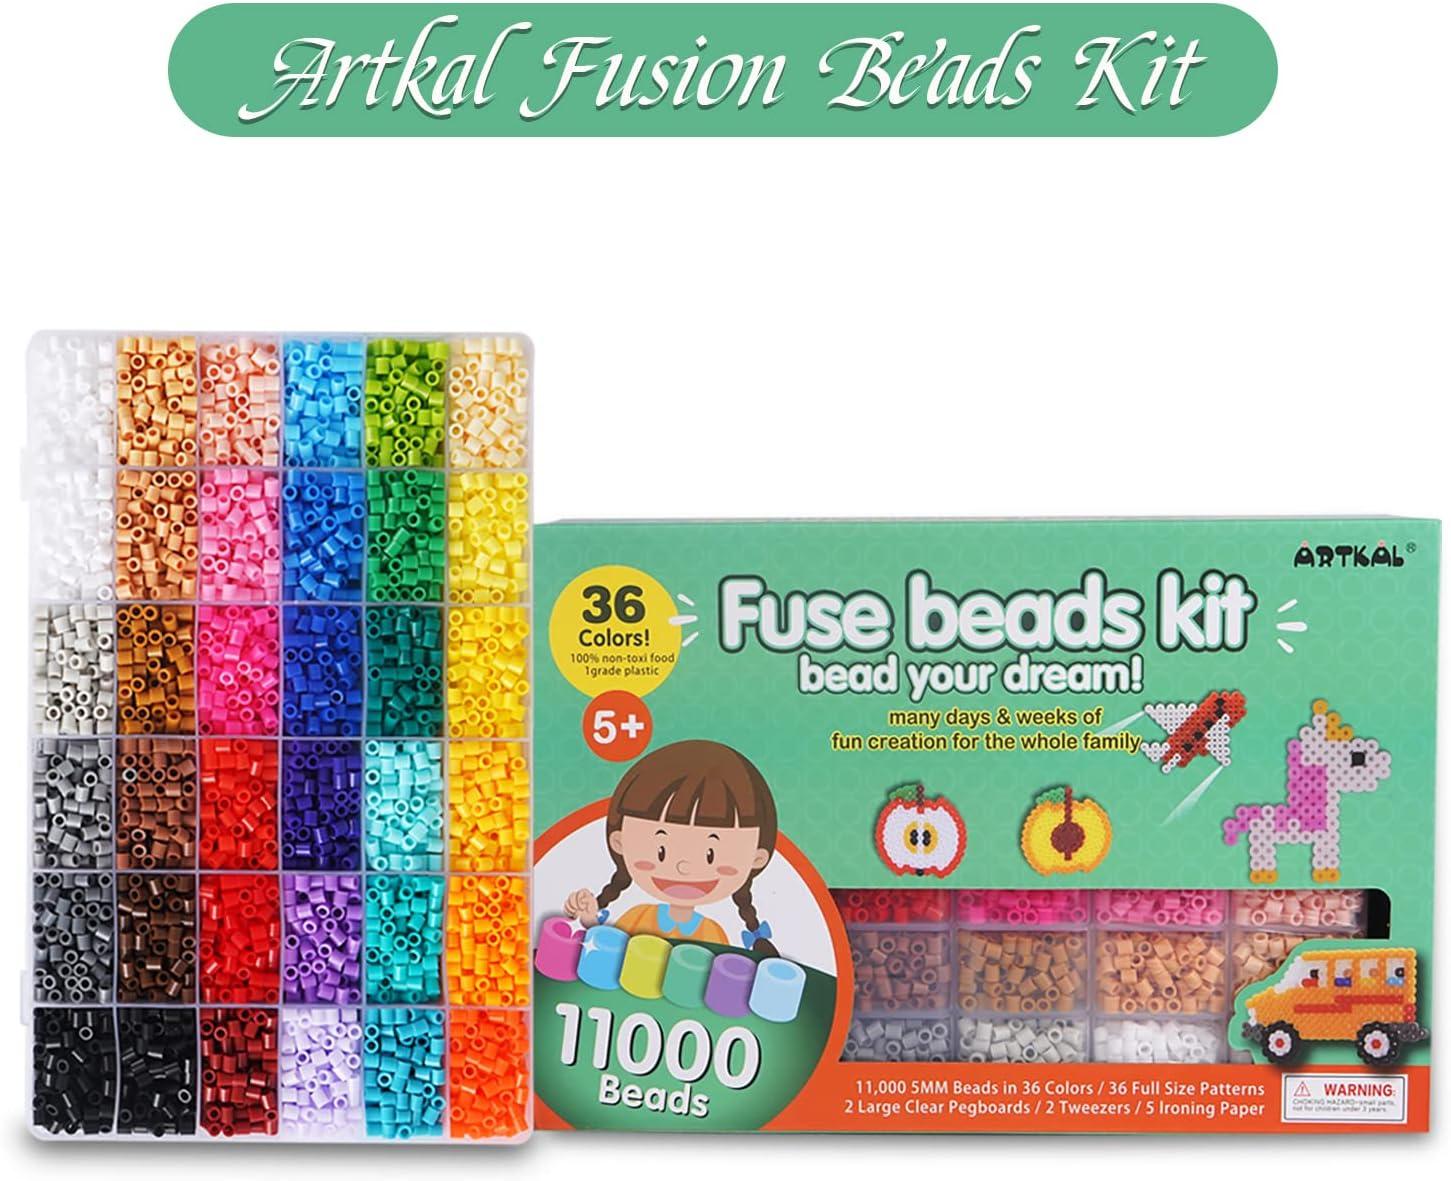 Artkal Fusion Beads Kit 11000 36 Colors Melting Beads Kit with 5 Pegboards  2 Tweezers 48 Patterns, Fuse Beads Kit Compatible Perler Beads Hama Beads  for Christmas Birthday Gift 11,000pcs 36 colors fuse beads kit